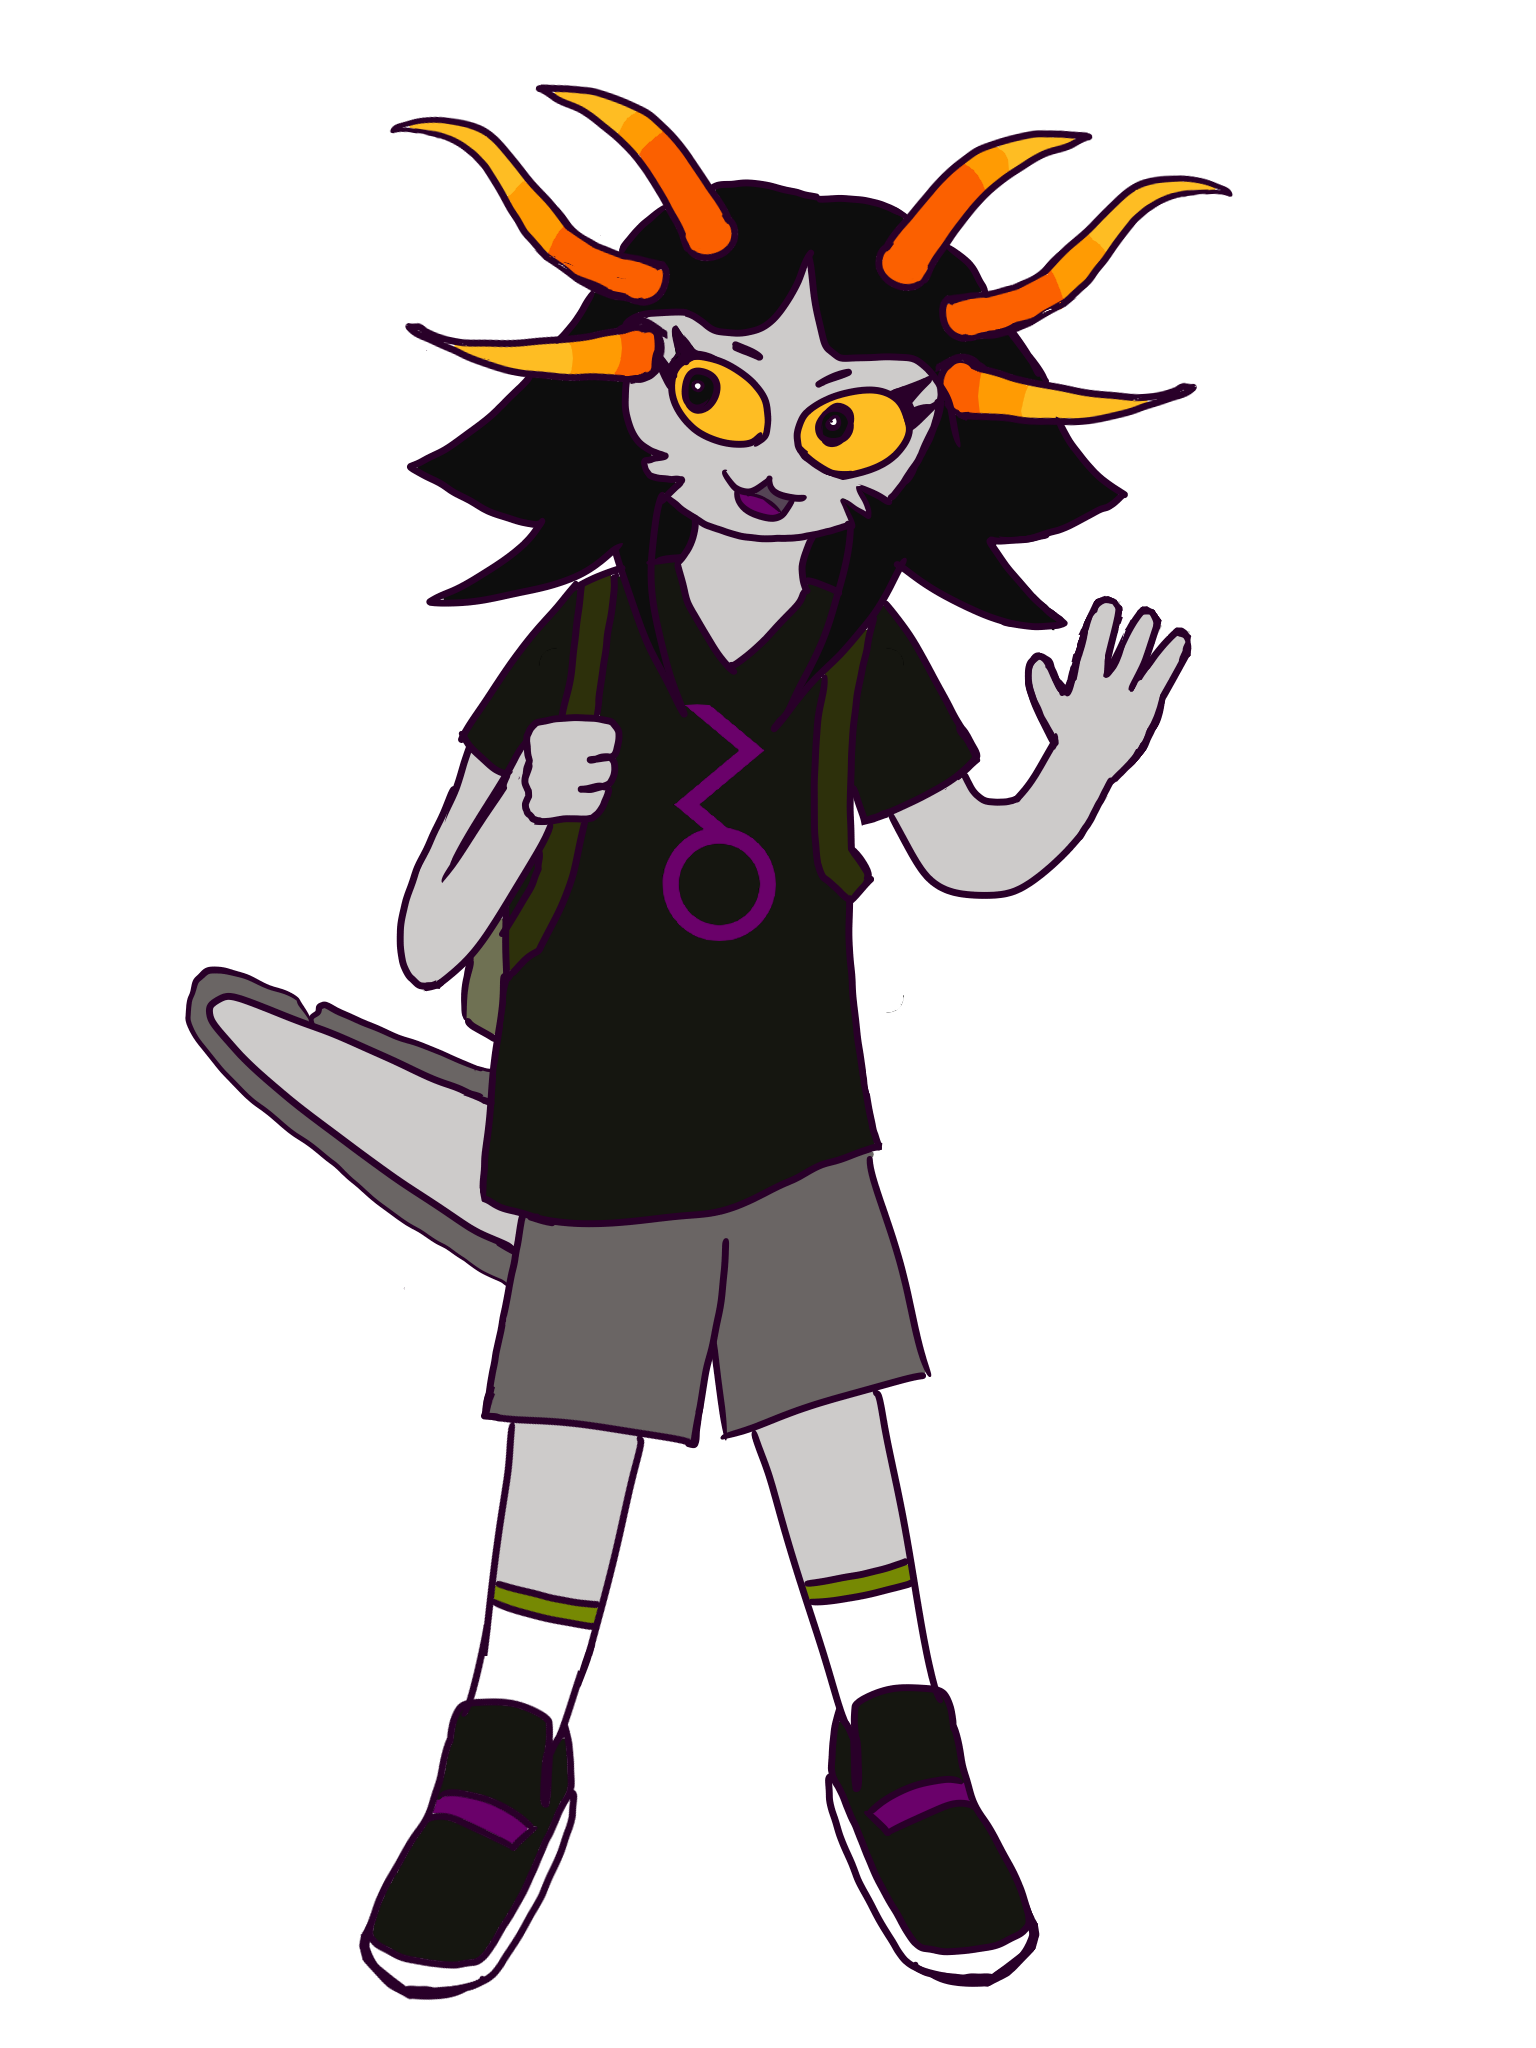 My drawing of Fiamet. Fiamet is a young troll girl with three pairs of horns and an eel like tail. She is wearing a black t-shirt with an Aquamino sign on it, grey shorts, a gray lime-ish backpack, white socks with a lime stripe, black sneakers with a violet strap. She is smiling with her kitty mouth and waving her hand.